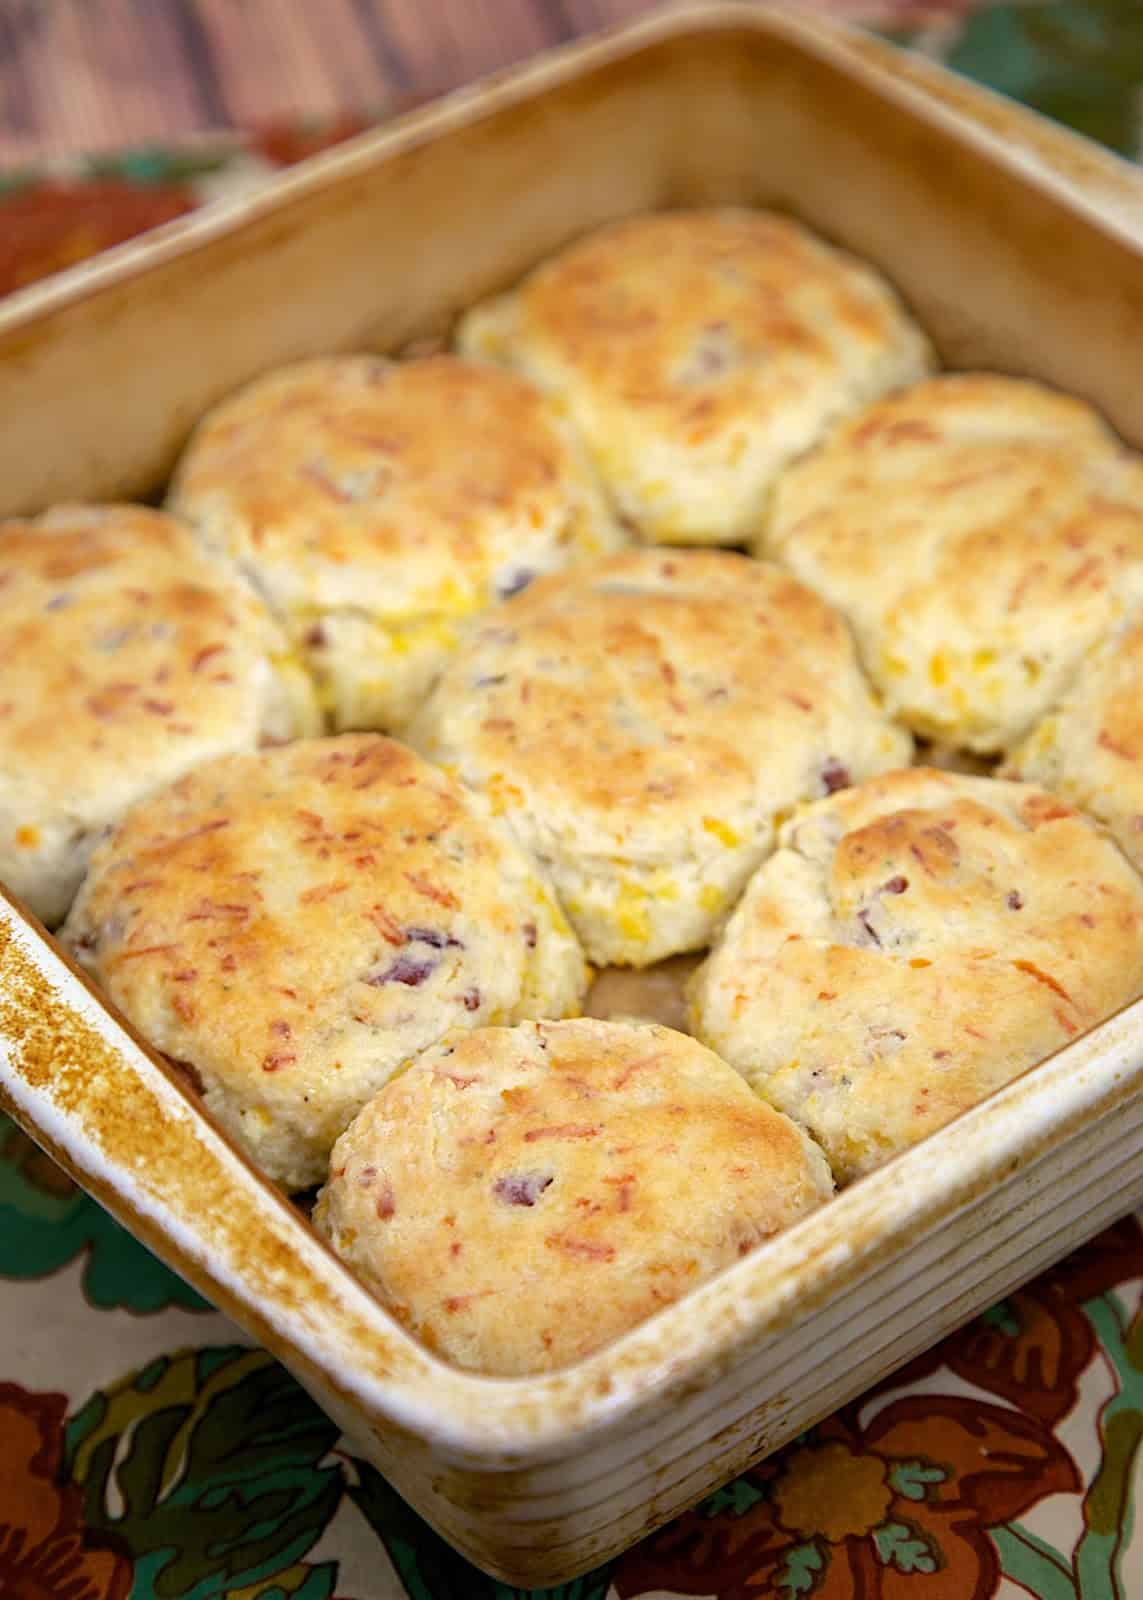 "Cracked Out" 7up Biscuits - bisquick, sour cream, Ranch, cheddar, bacon and 7up - the best biscuits! I could make a meal out of these things!